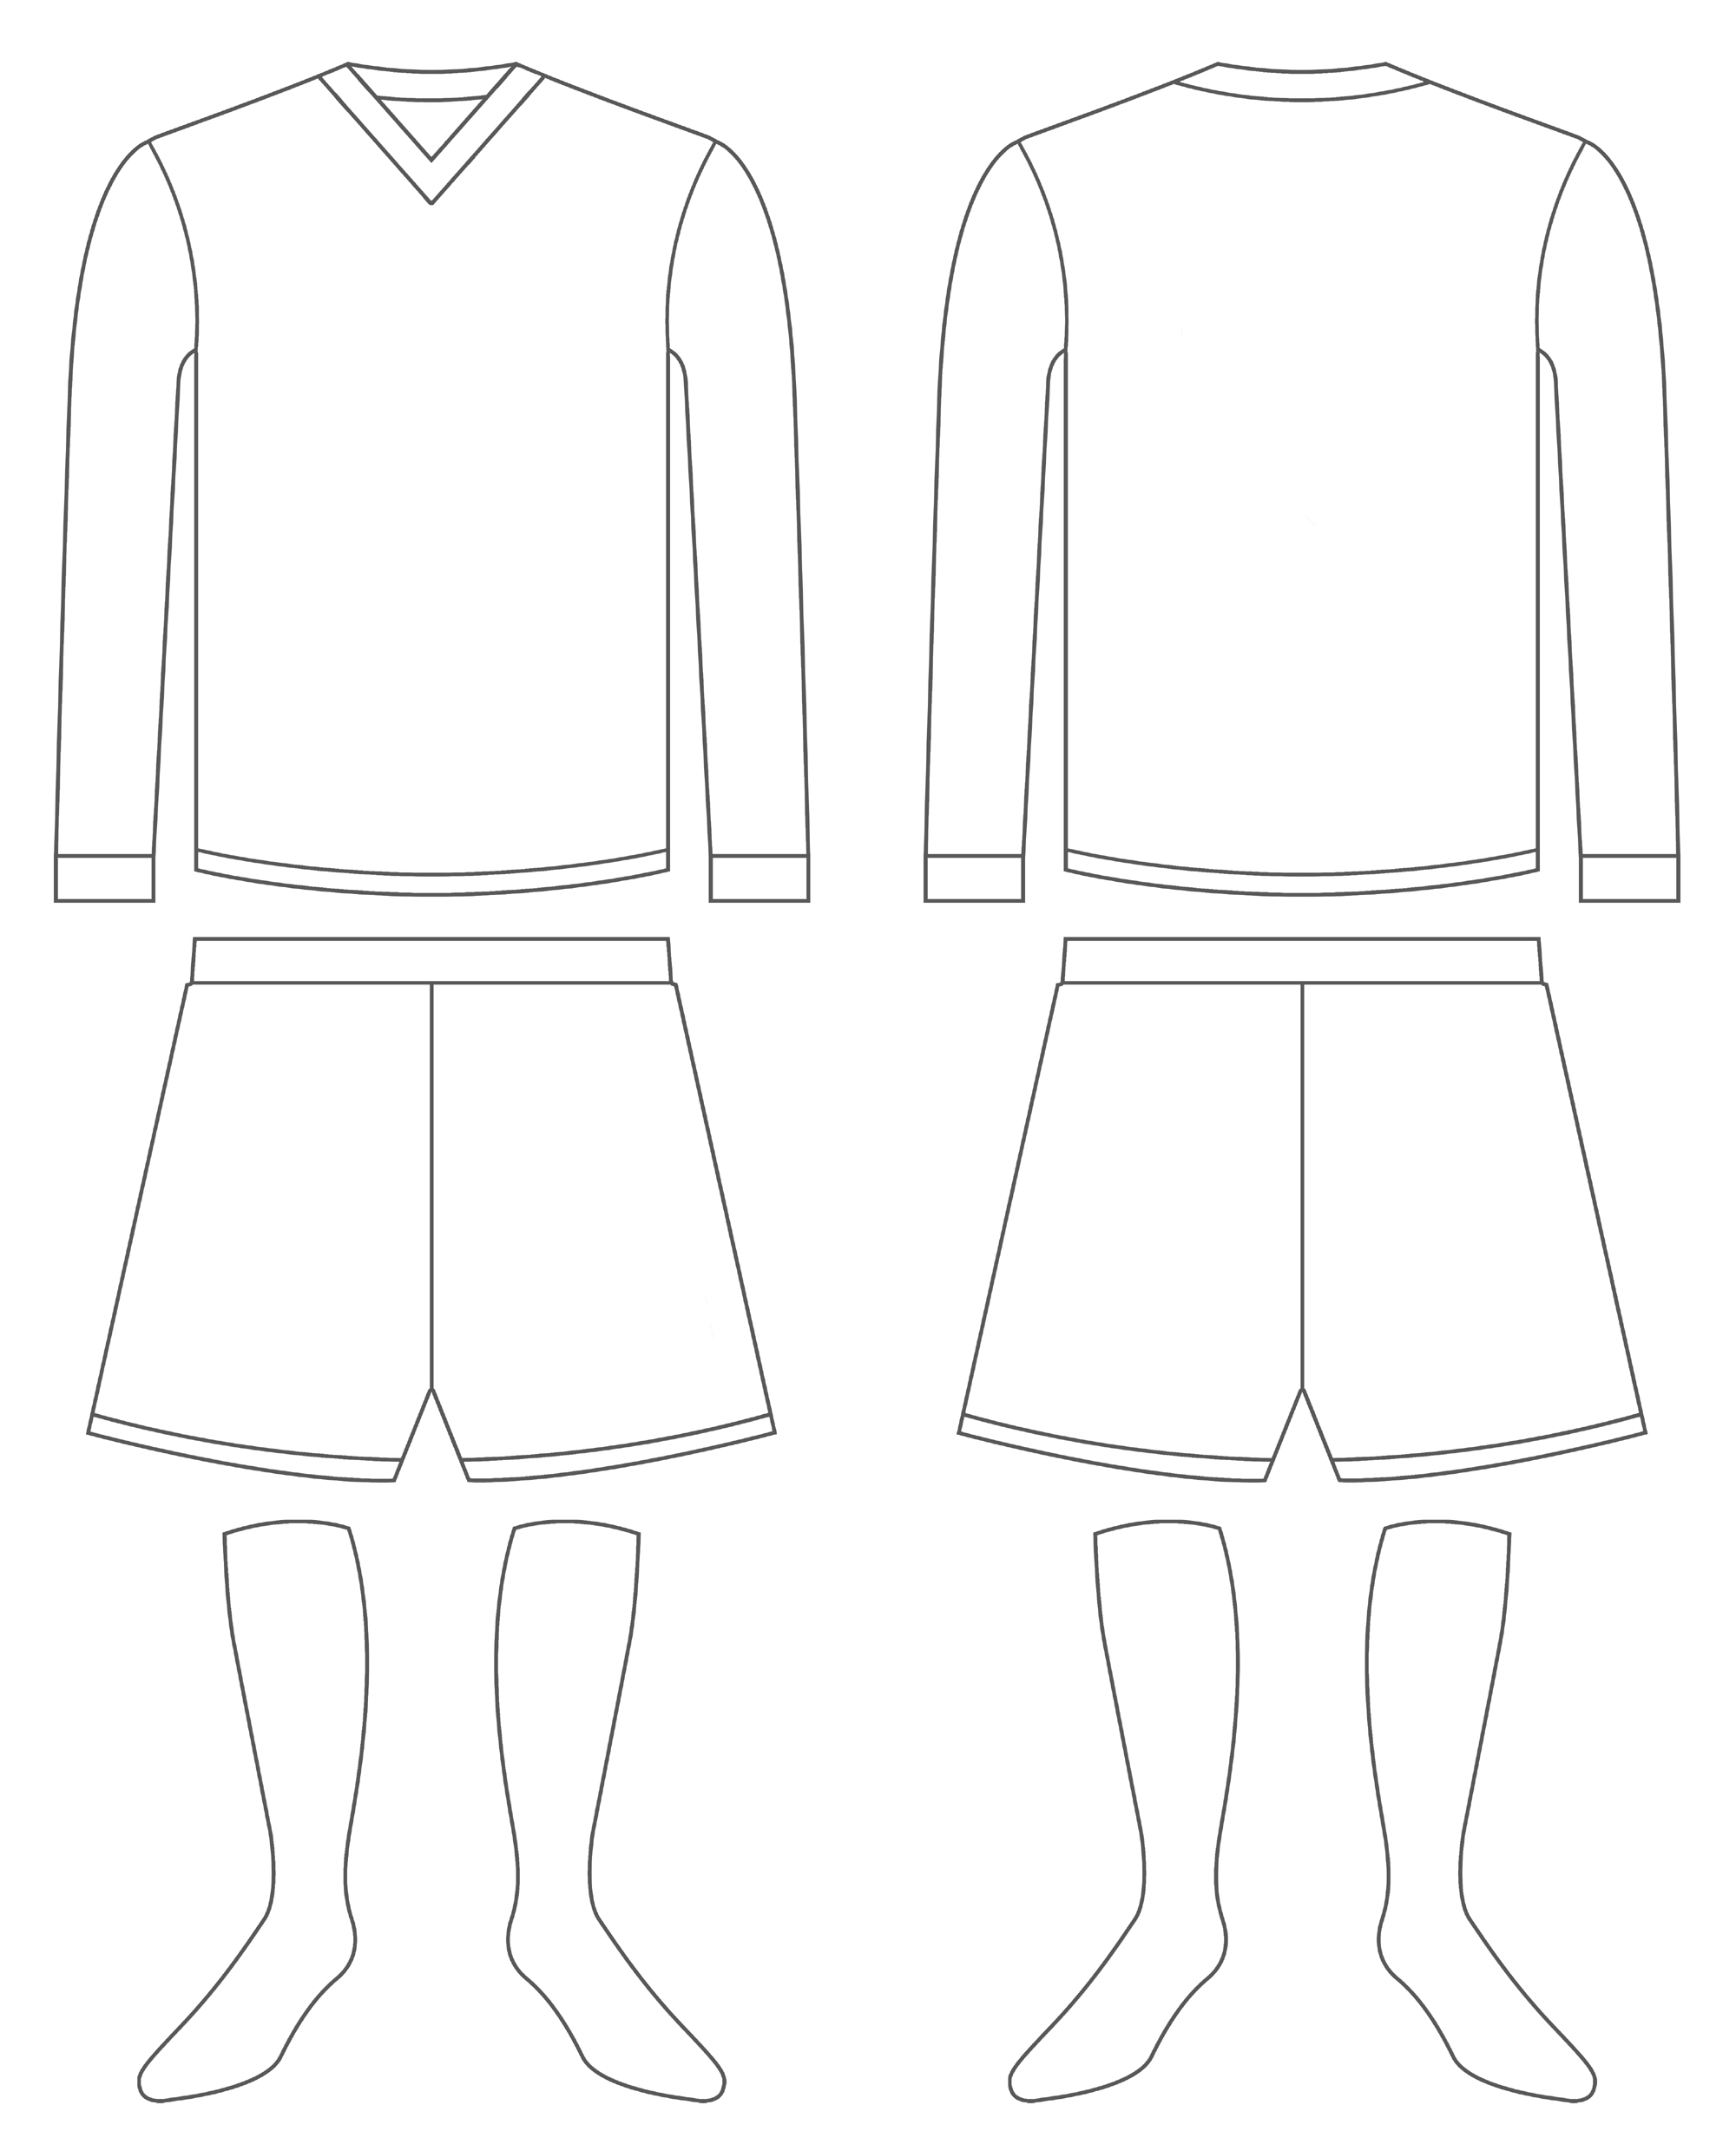 Free Blank Soccer Jersey Template, Download Free Blank Soccer Jersey ...